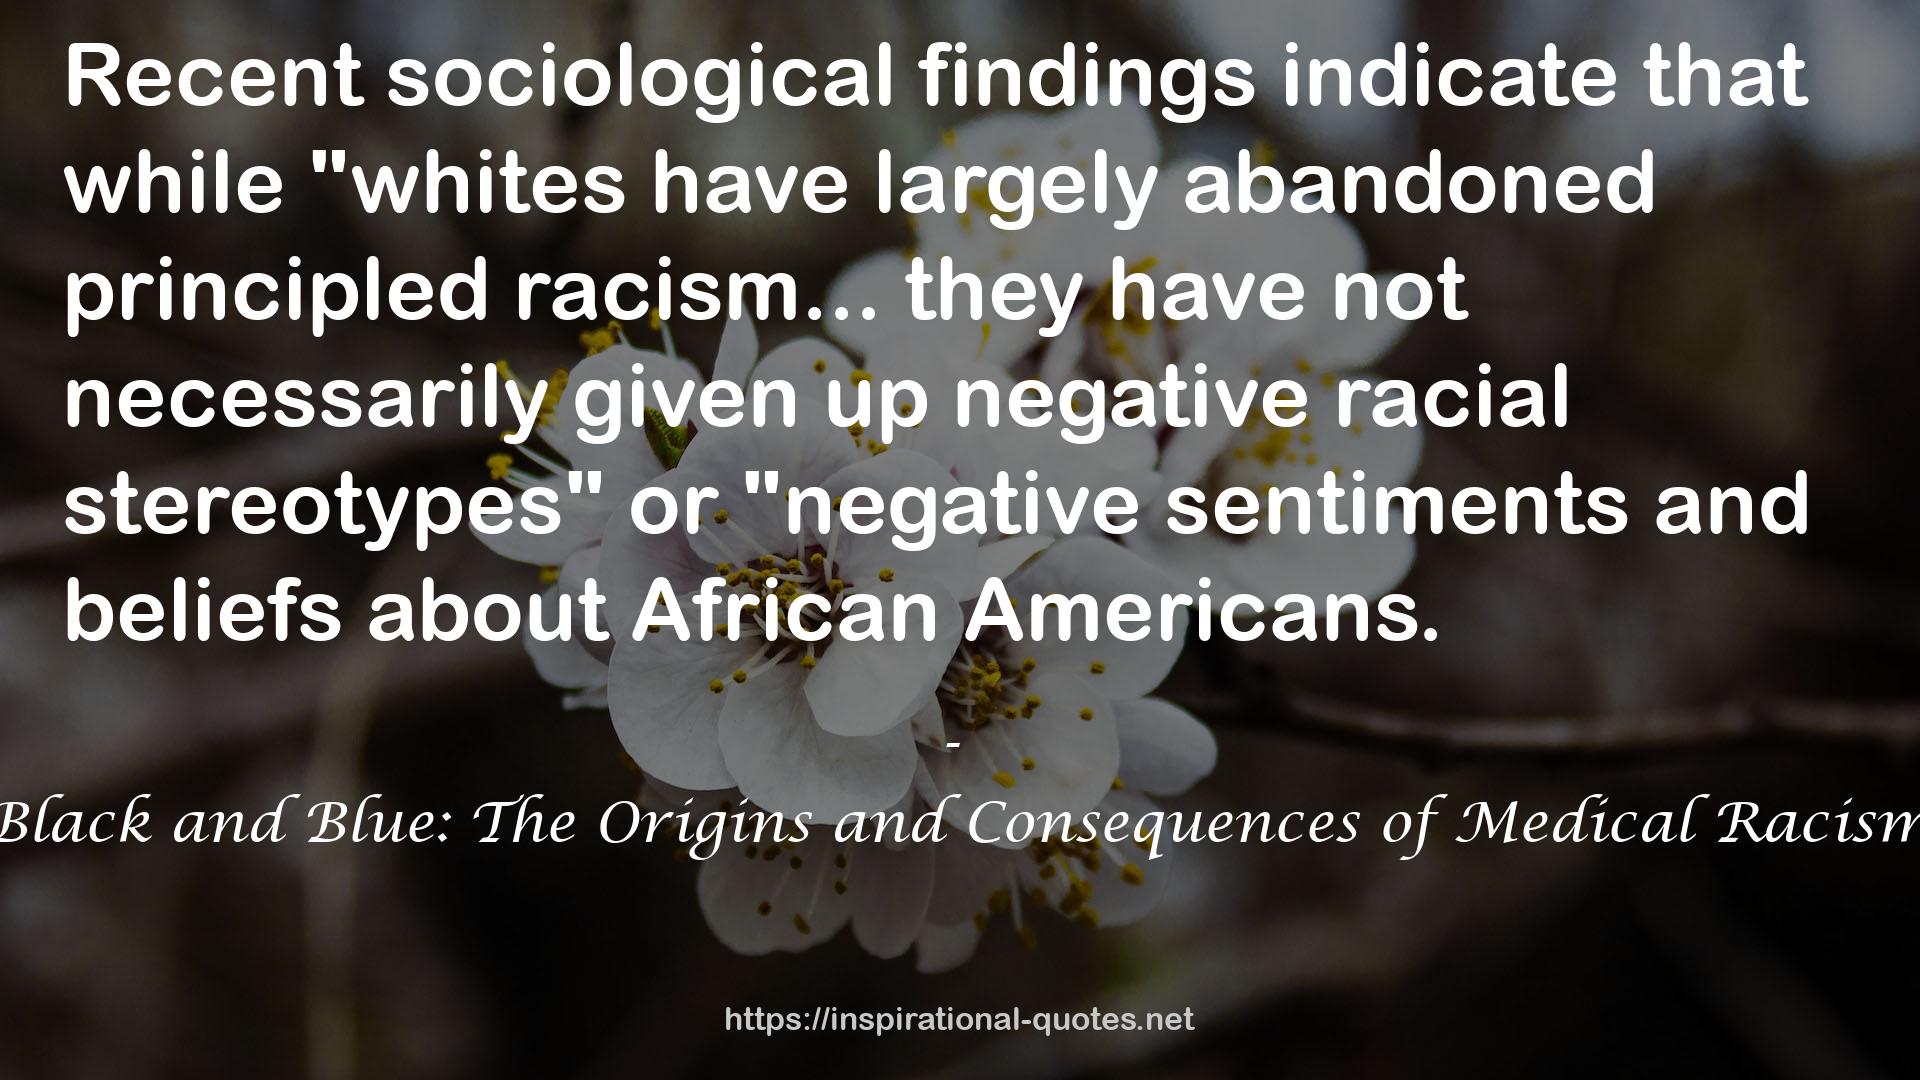 Black and Blue: The Origins and Consequences of Medical Racism QUOTES